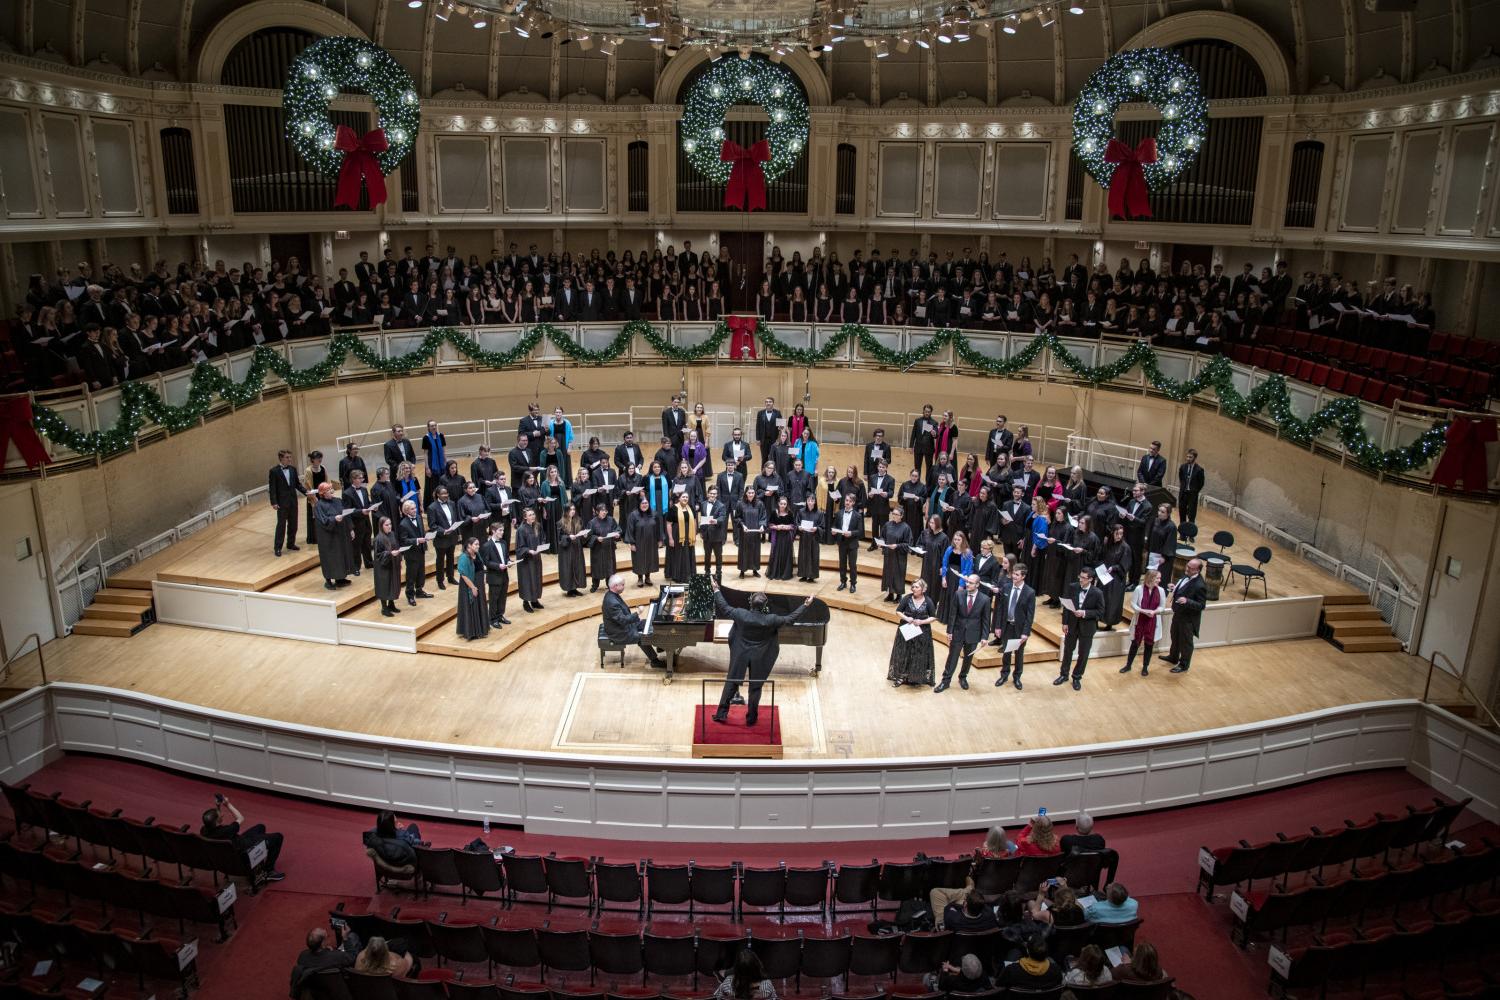 The <a href='http://jqc1.ynwlad.net'>全球十大赌钱排行app</a> Choir performs in the Chicago Symphony Hall.